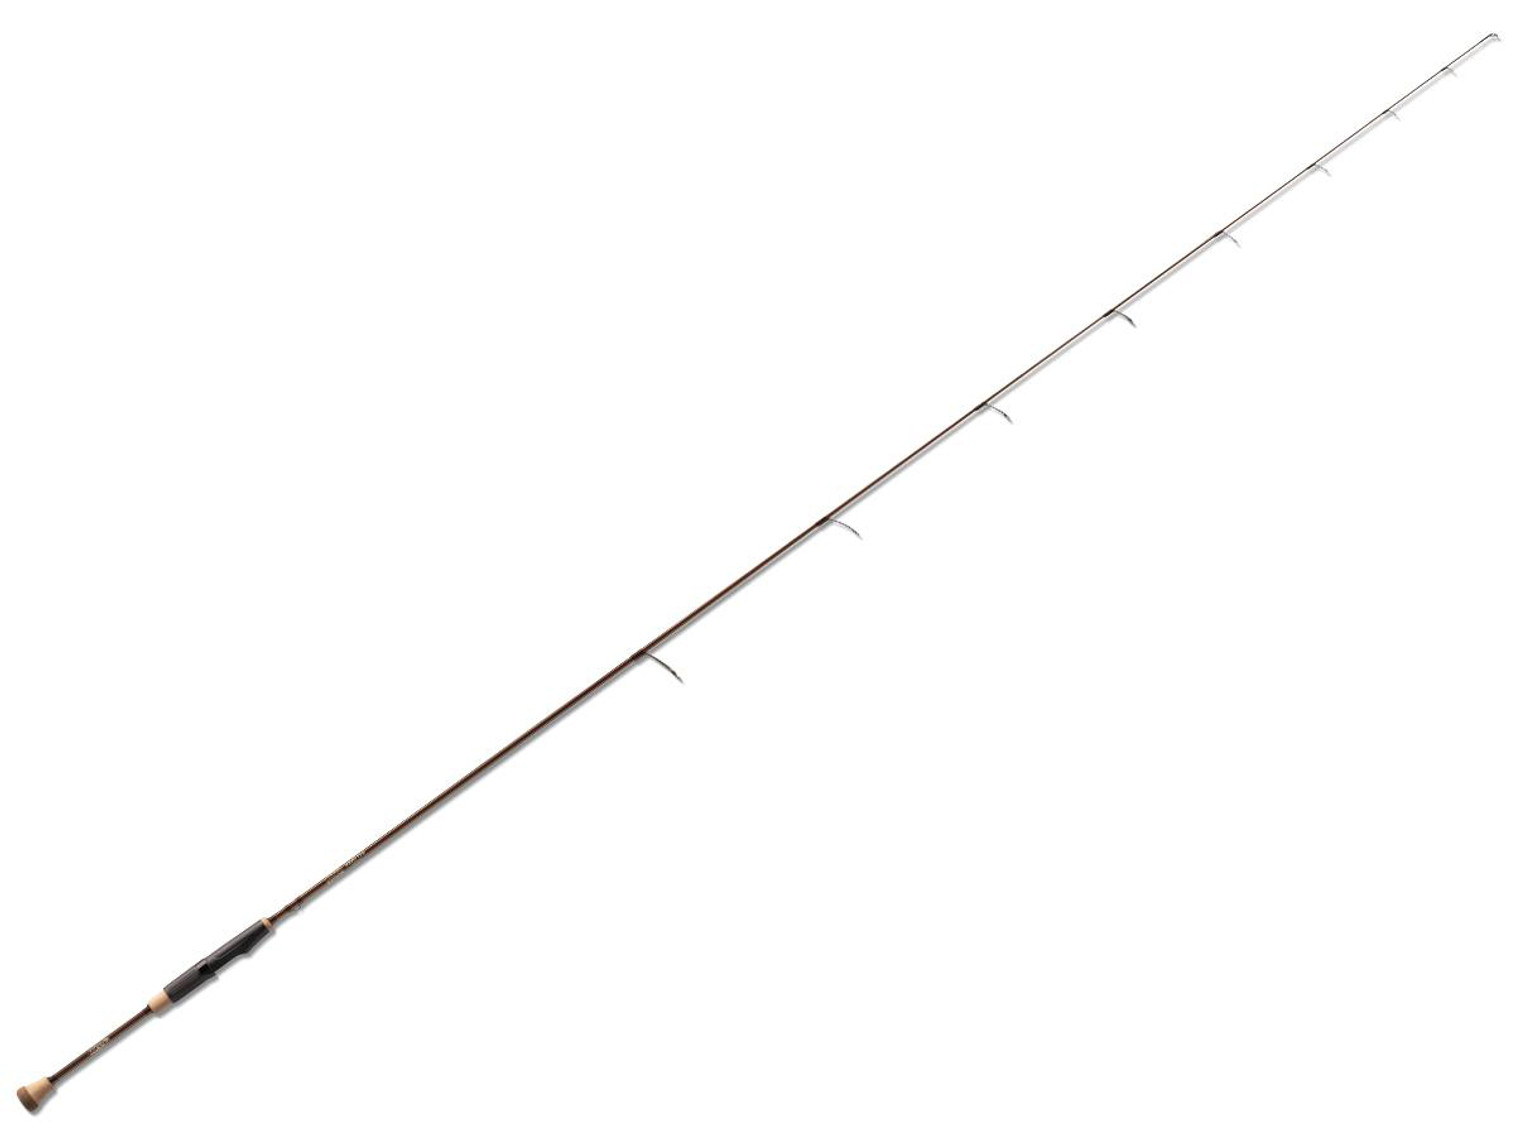 St. Croix Rods Panfish Series Spinning Fishing Rod (Model: PNS70LXF)